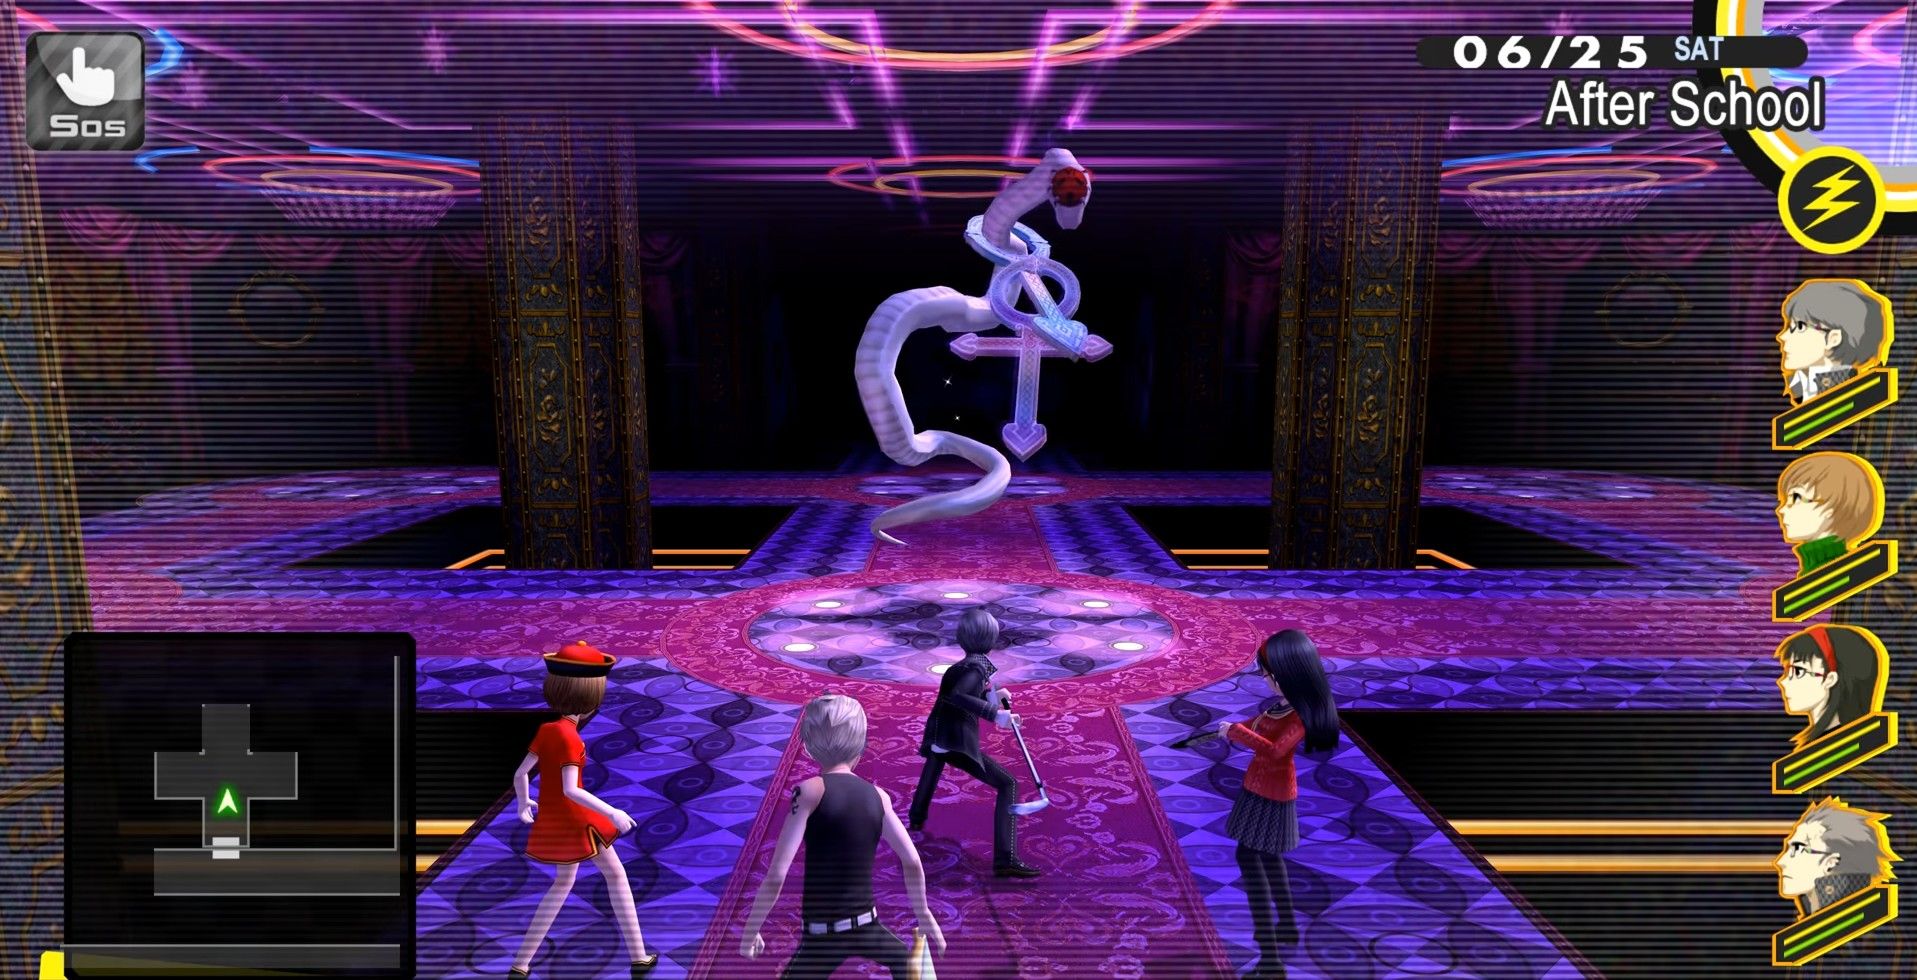 yu, chie, kanji, and yukiko about to fight amorous snake in persona 4 golden in the marukyu striptease dungeon rise's dungeon